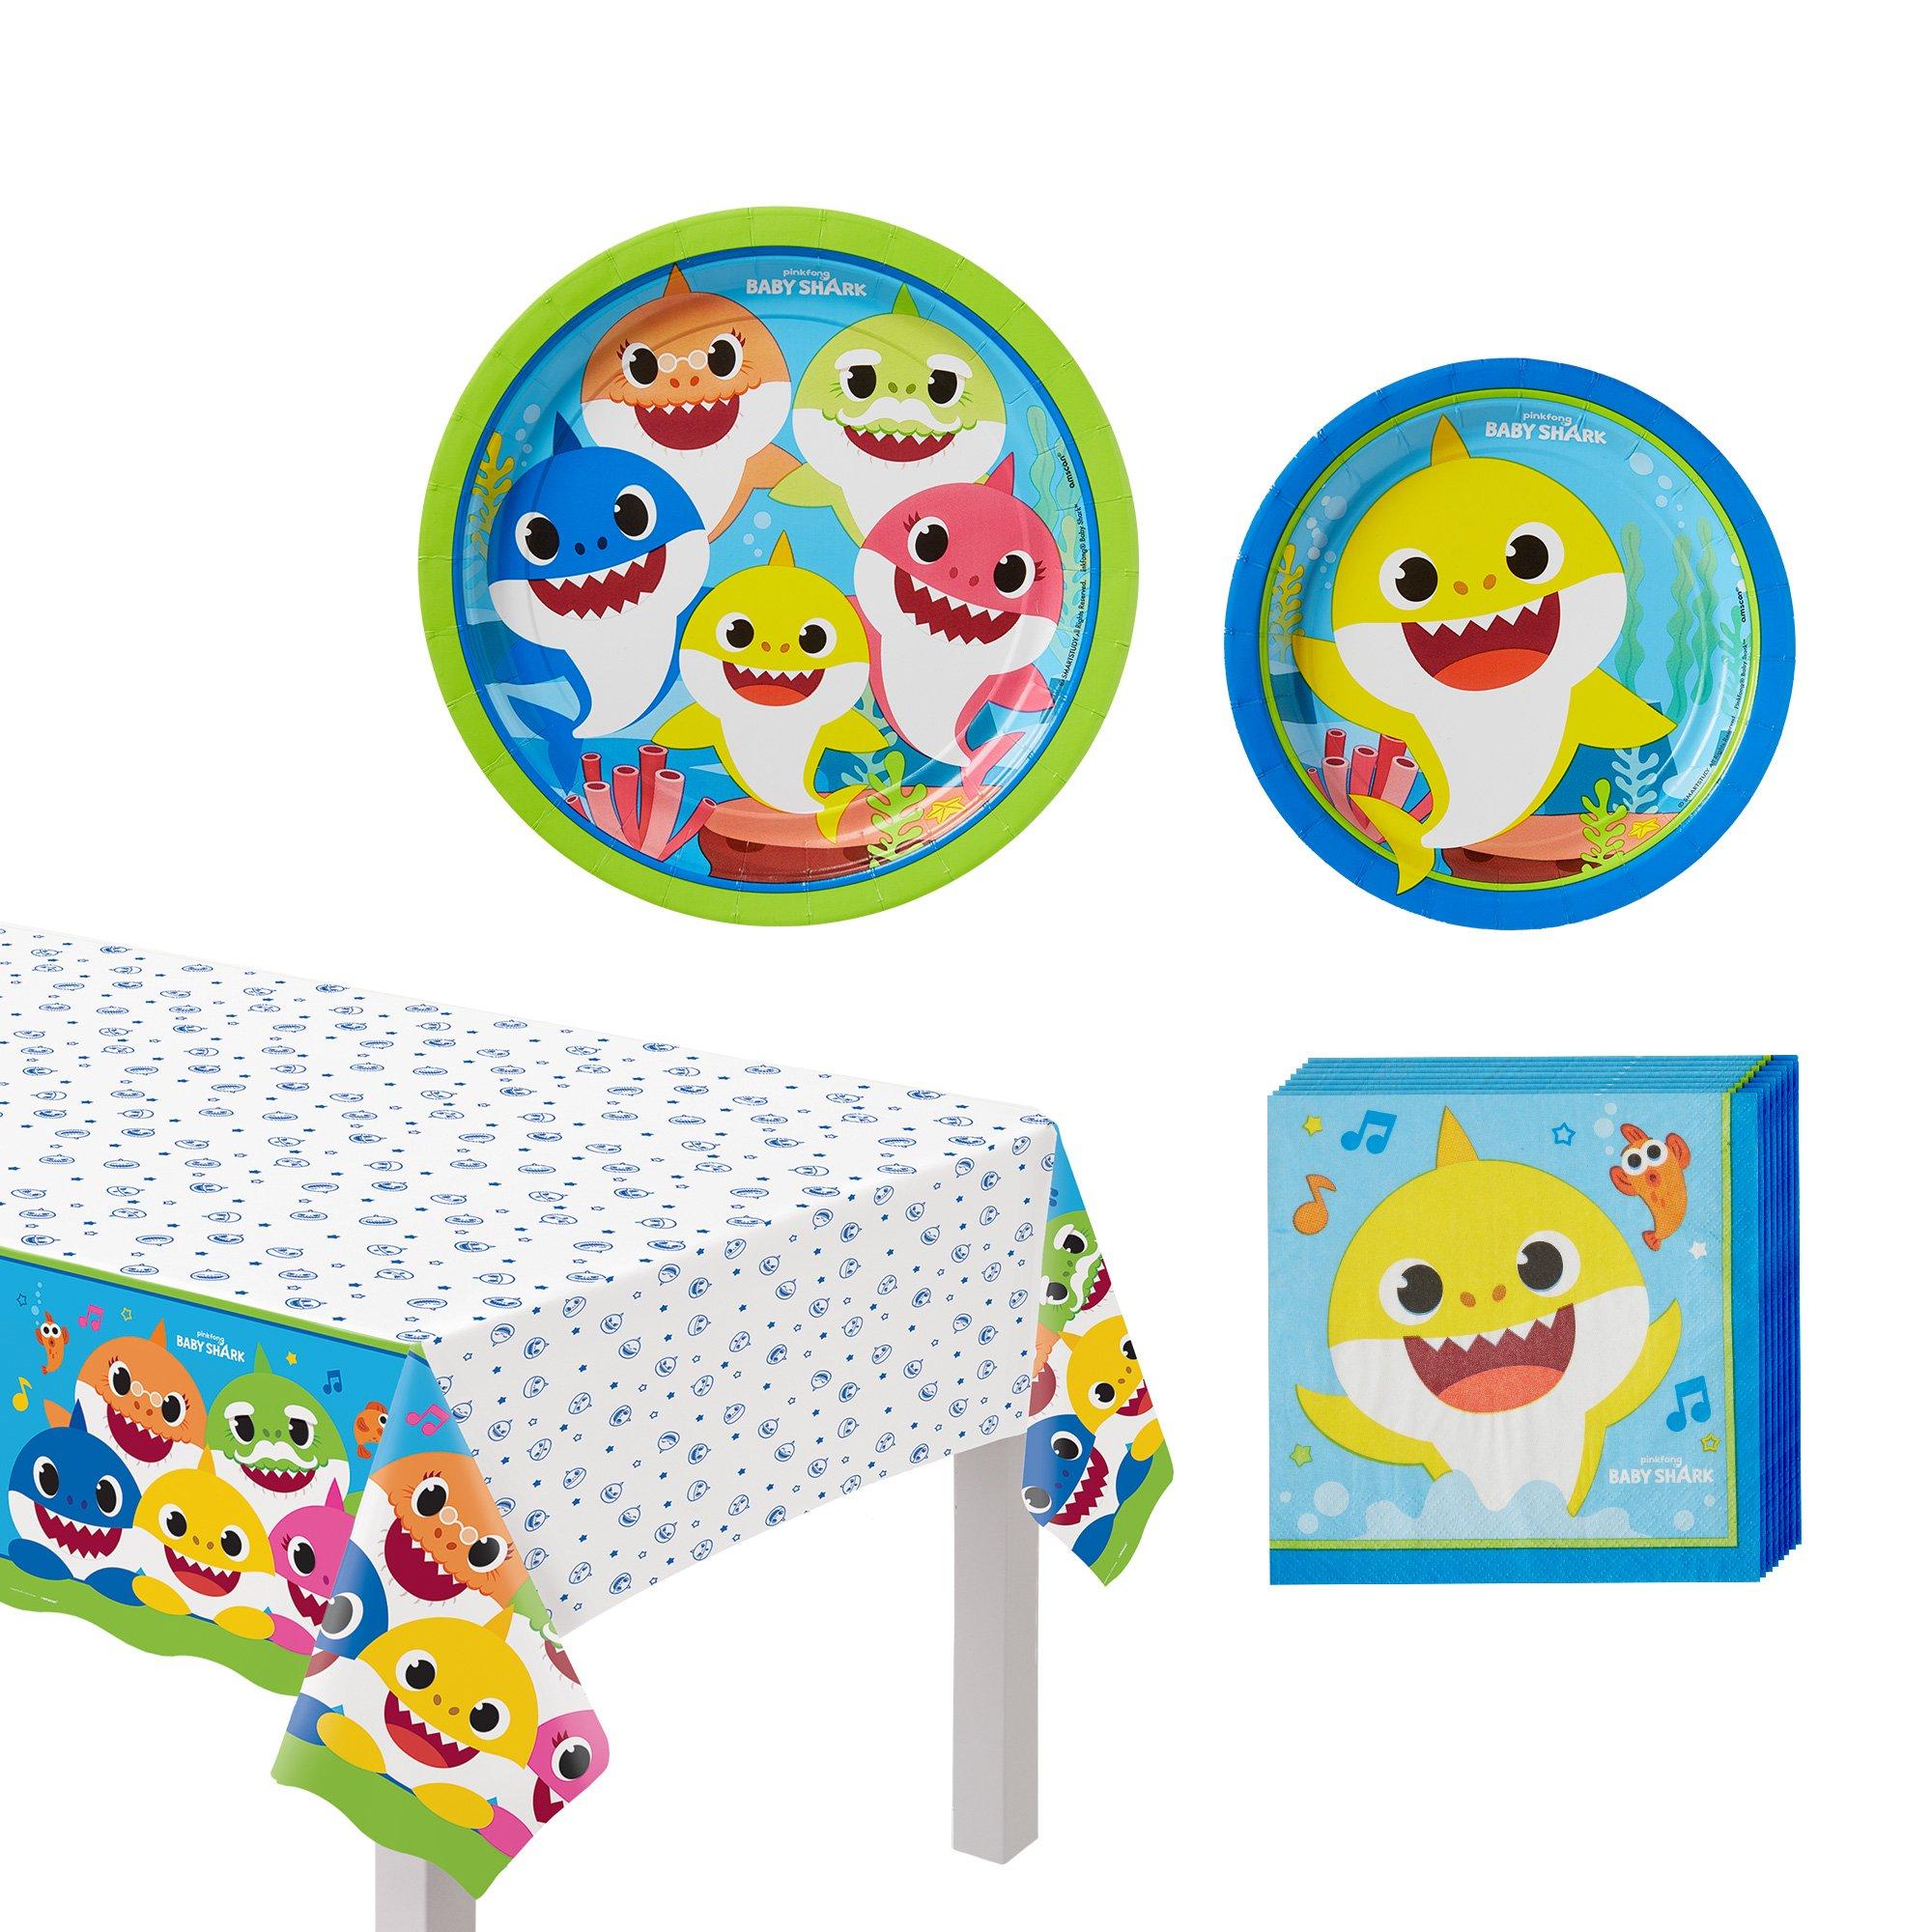 Baby Shark Core Birthday Party Supplies Pack for 8 Guests - Kit Includes Plates, Napkins & Table Cover